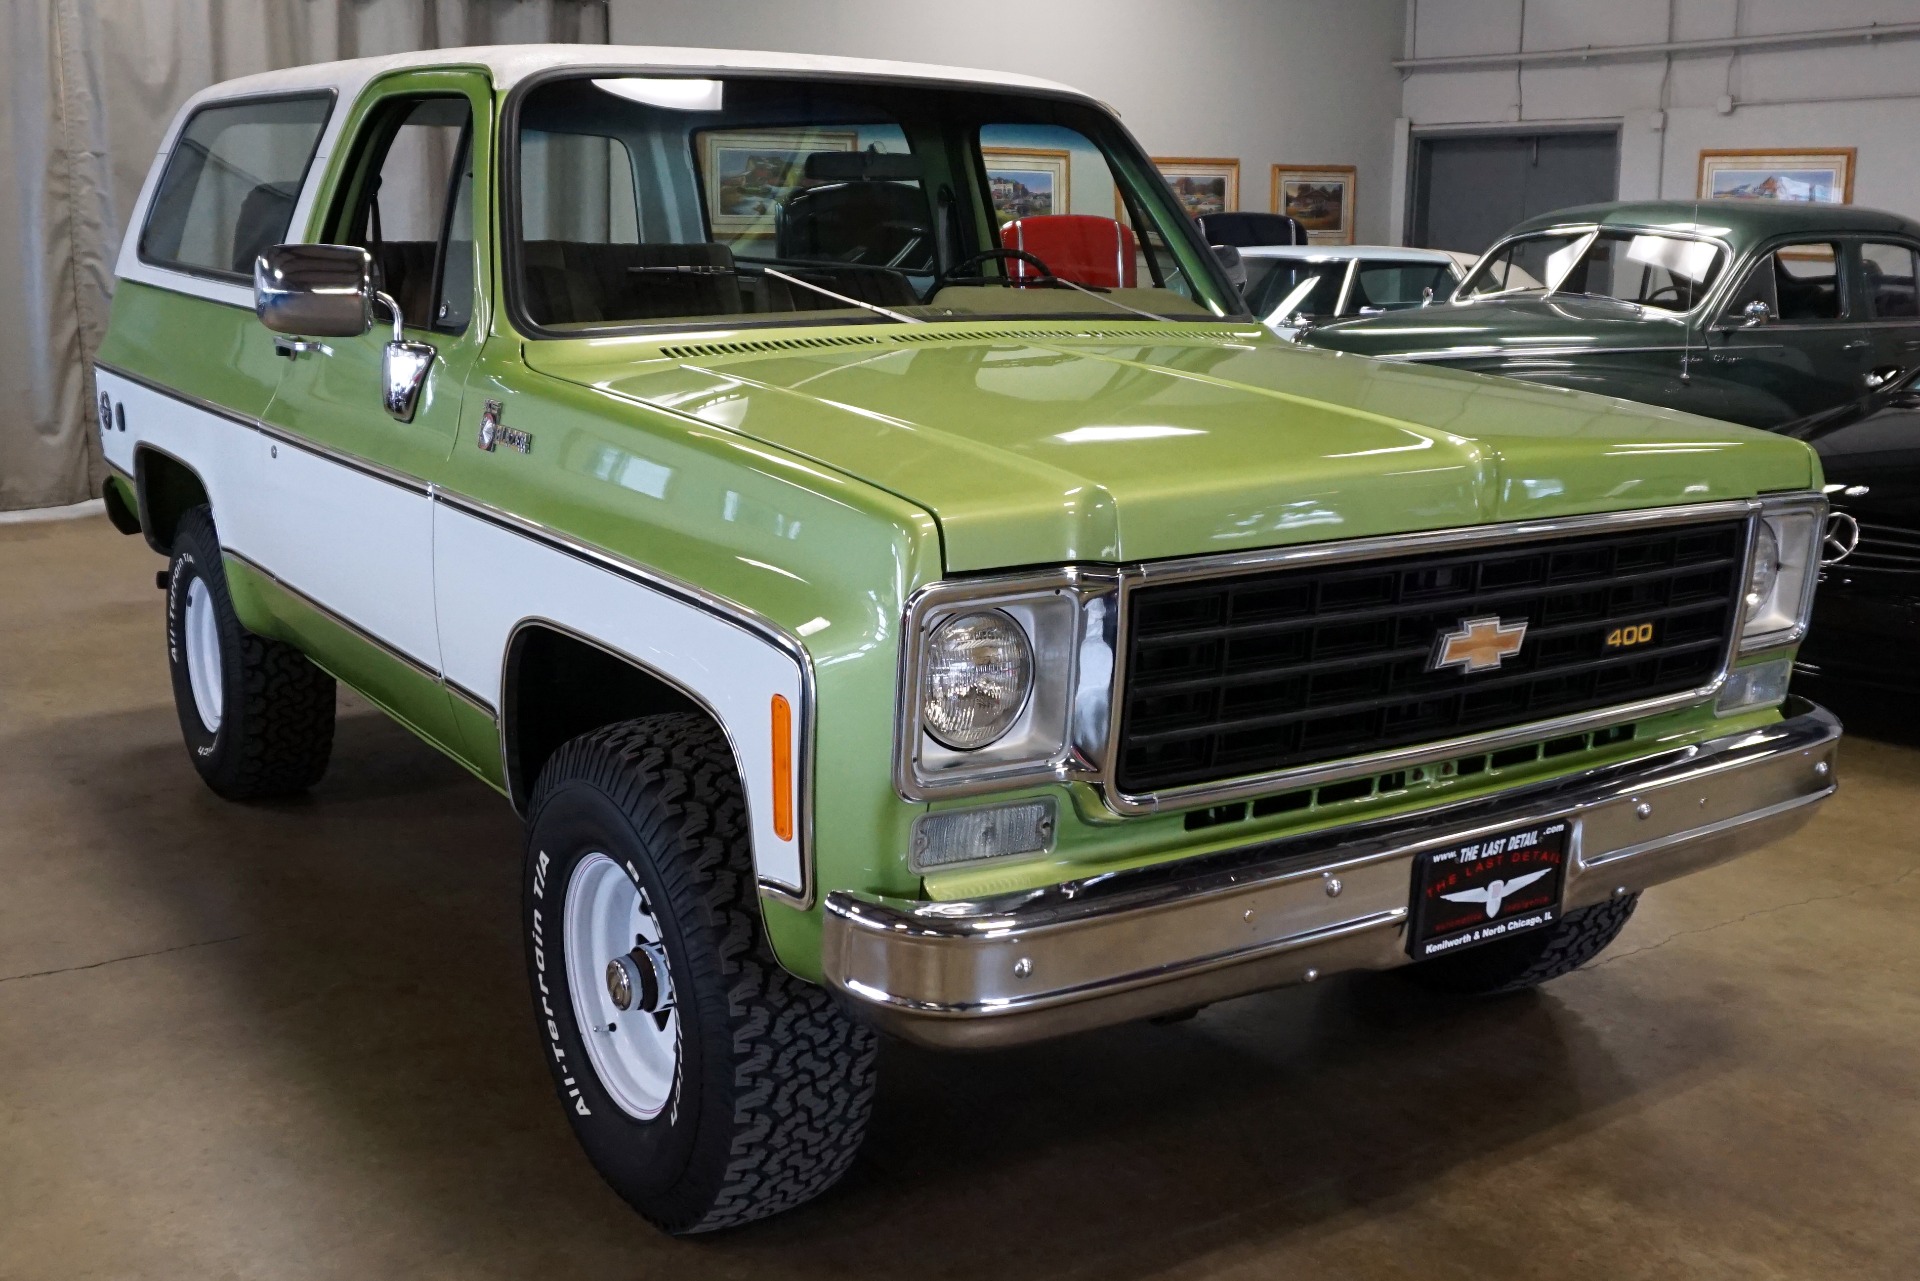 1976 Chevrolet K5 Blazer Catalog and Classic Car Guide, Ratings and ...